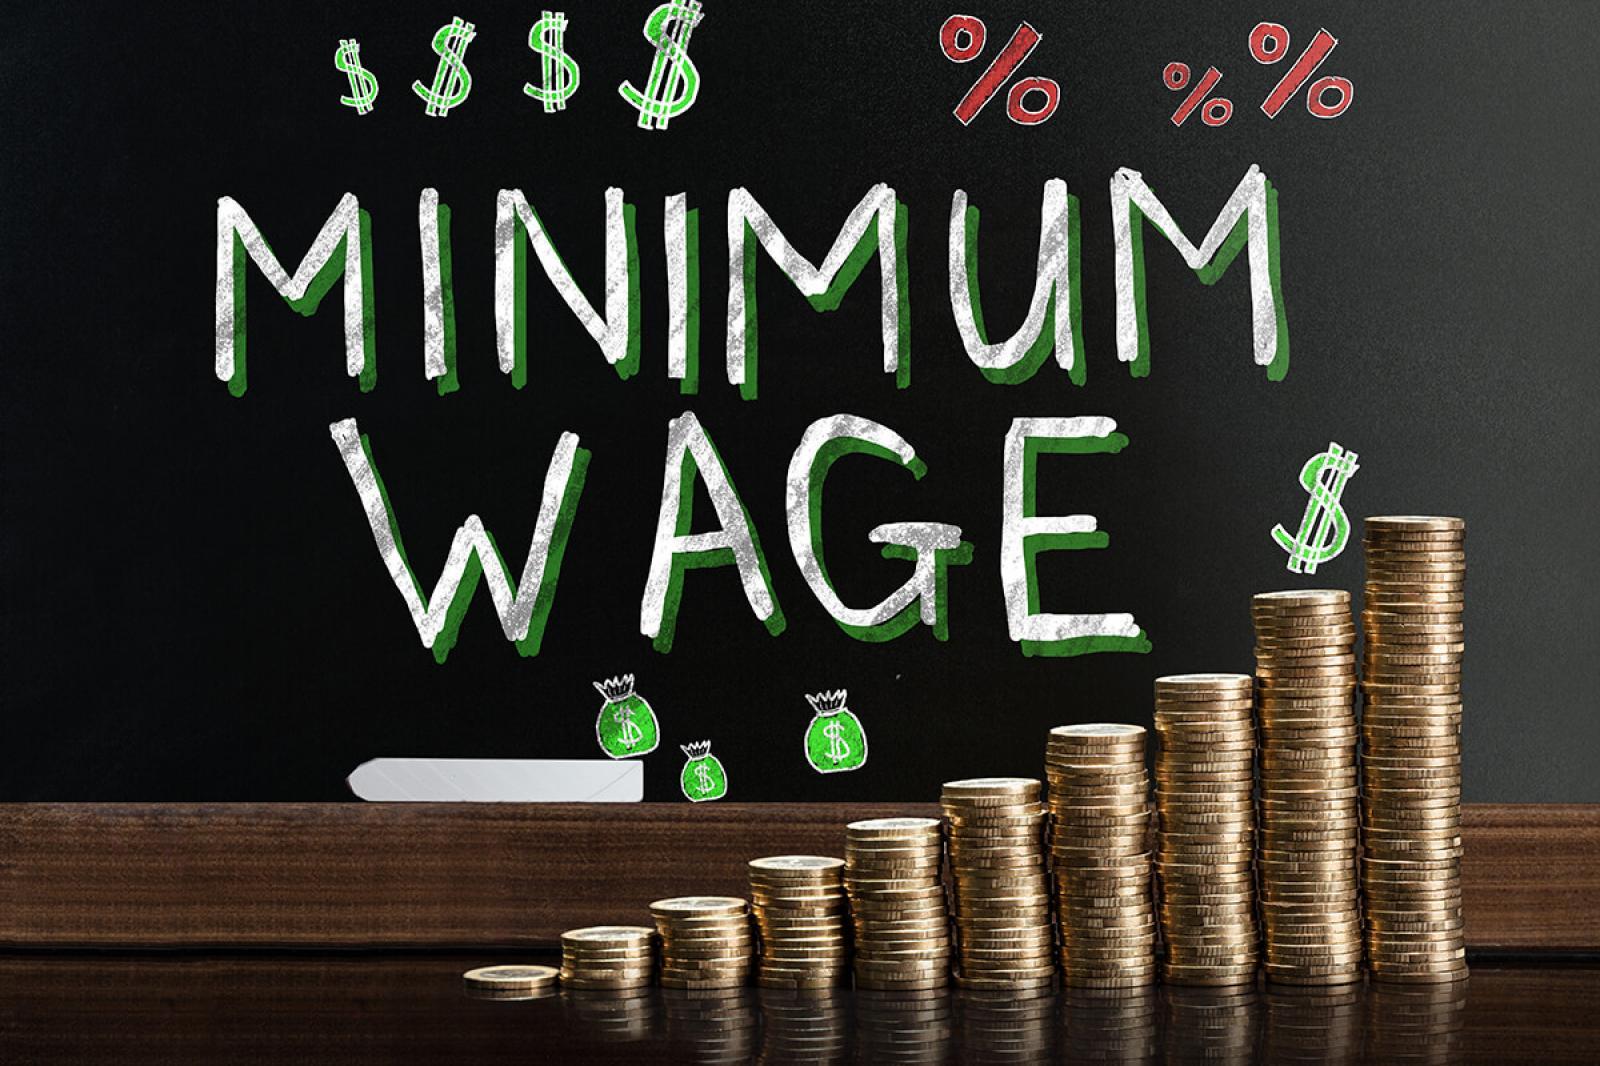 Ontario minimum wage increased by 10 cents